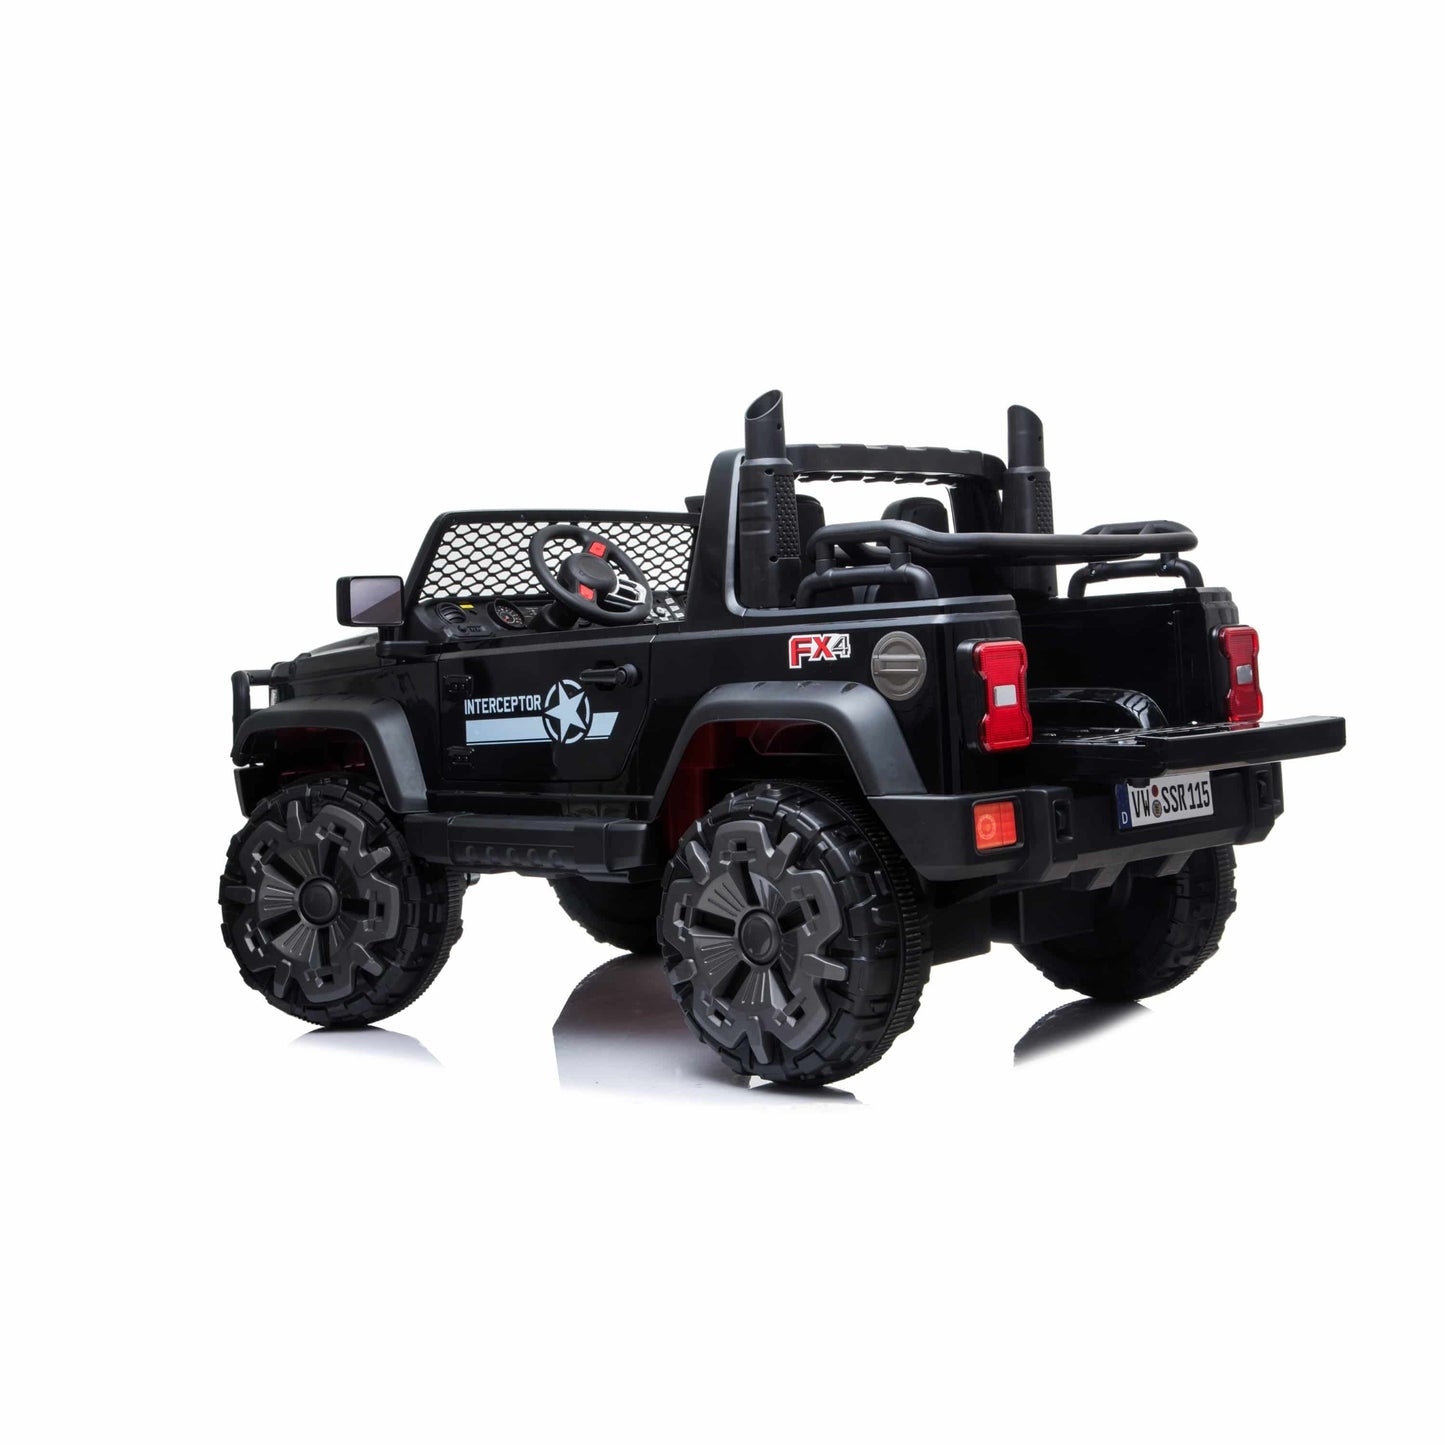 24V Freddo Toys Pick Up Truck 2 Seater Ride on with Parental Remote Control for 3+ Years (Black)